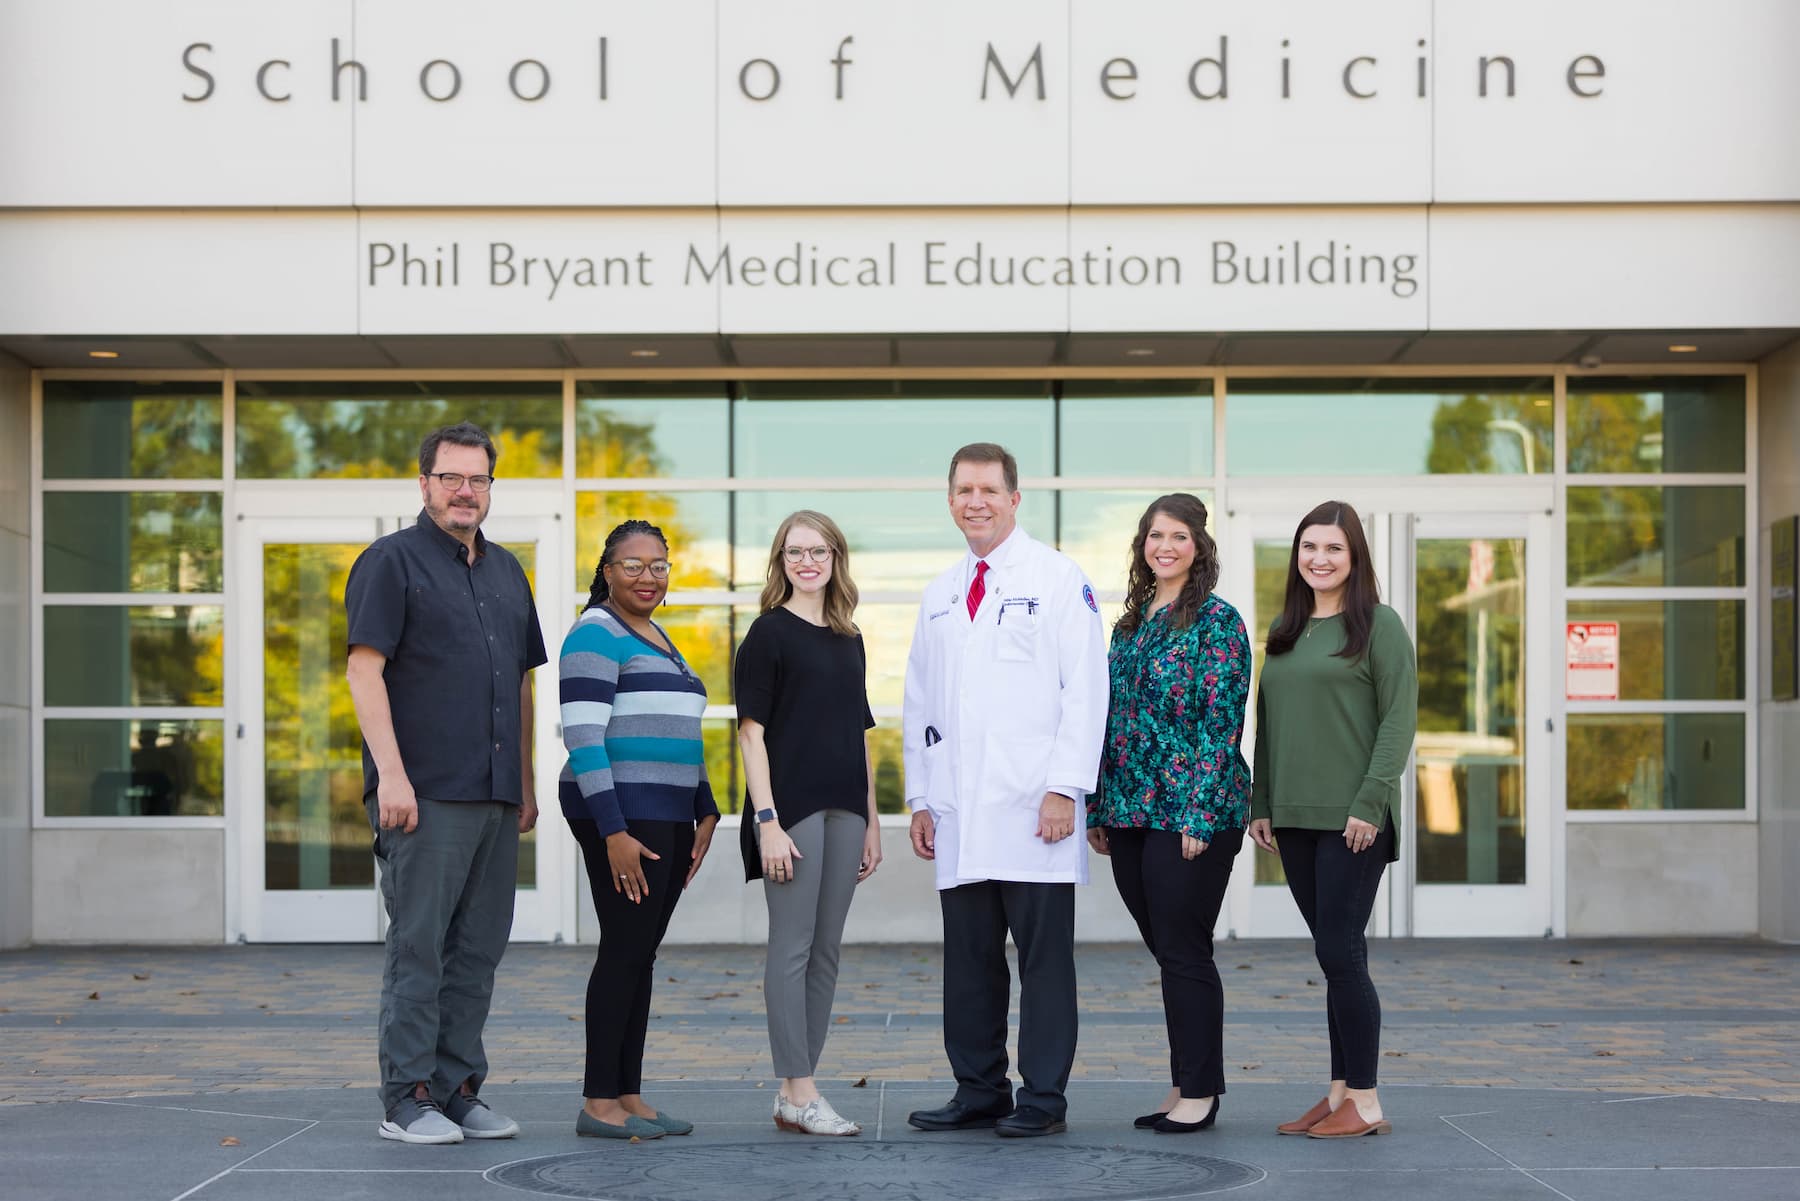 Six members of the SOM Student Affairs Team standing in front of the School of Medicine. From left to right: Dr. Jerry Clark, Jessica Nickols, Dr. Lyssa Weatherly, Dr. Michael McMullan, Tressie Nichols, Felicity Broderick.